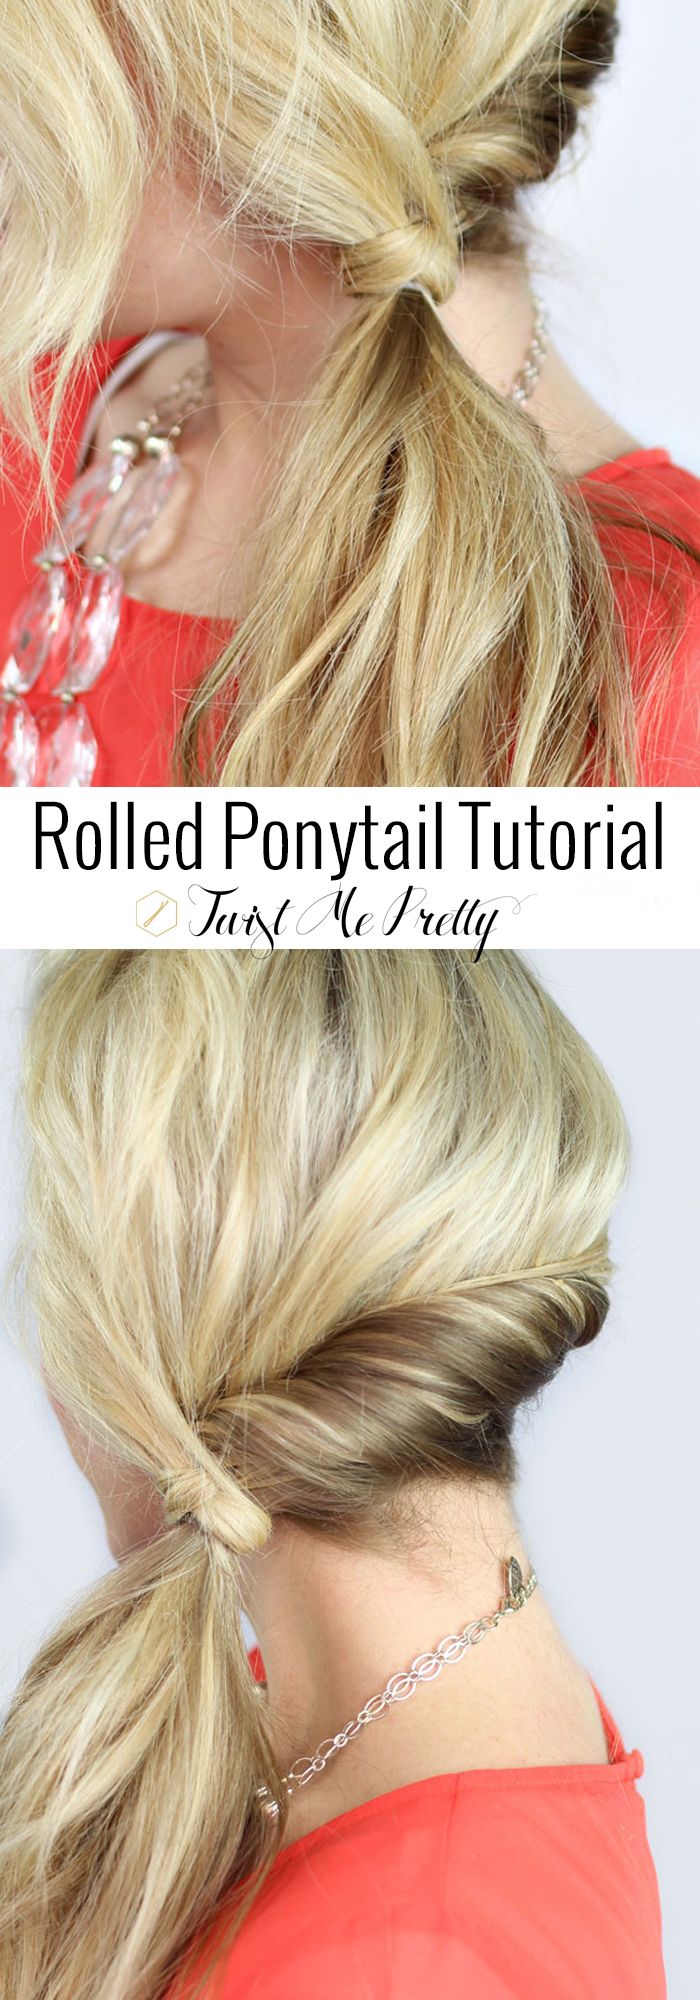 Hot Side-Ponytail Hairstyles: Romantic, Sleek, Sexy& Casual Looks for Long Hair